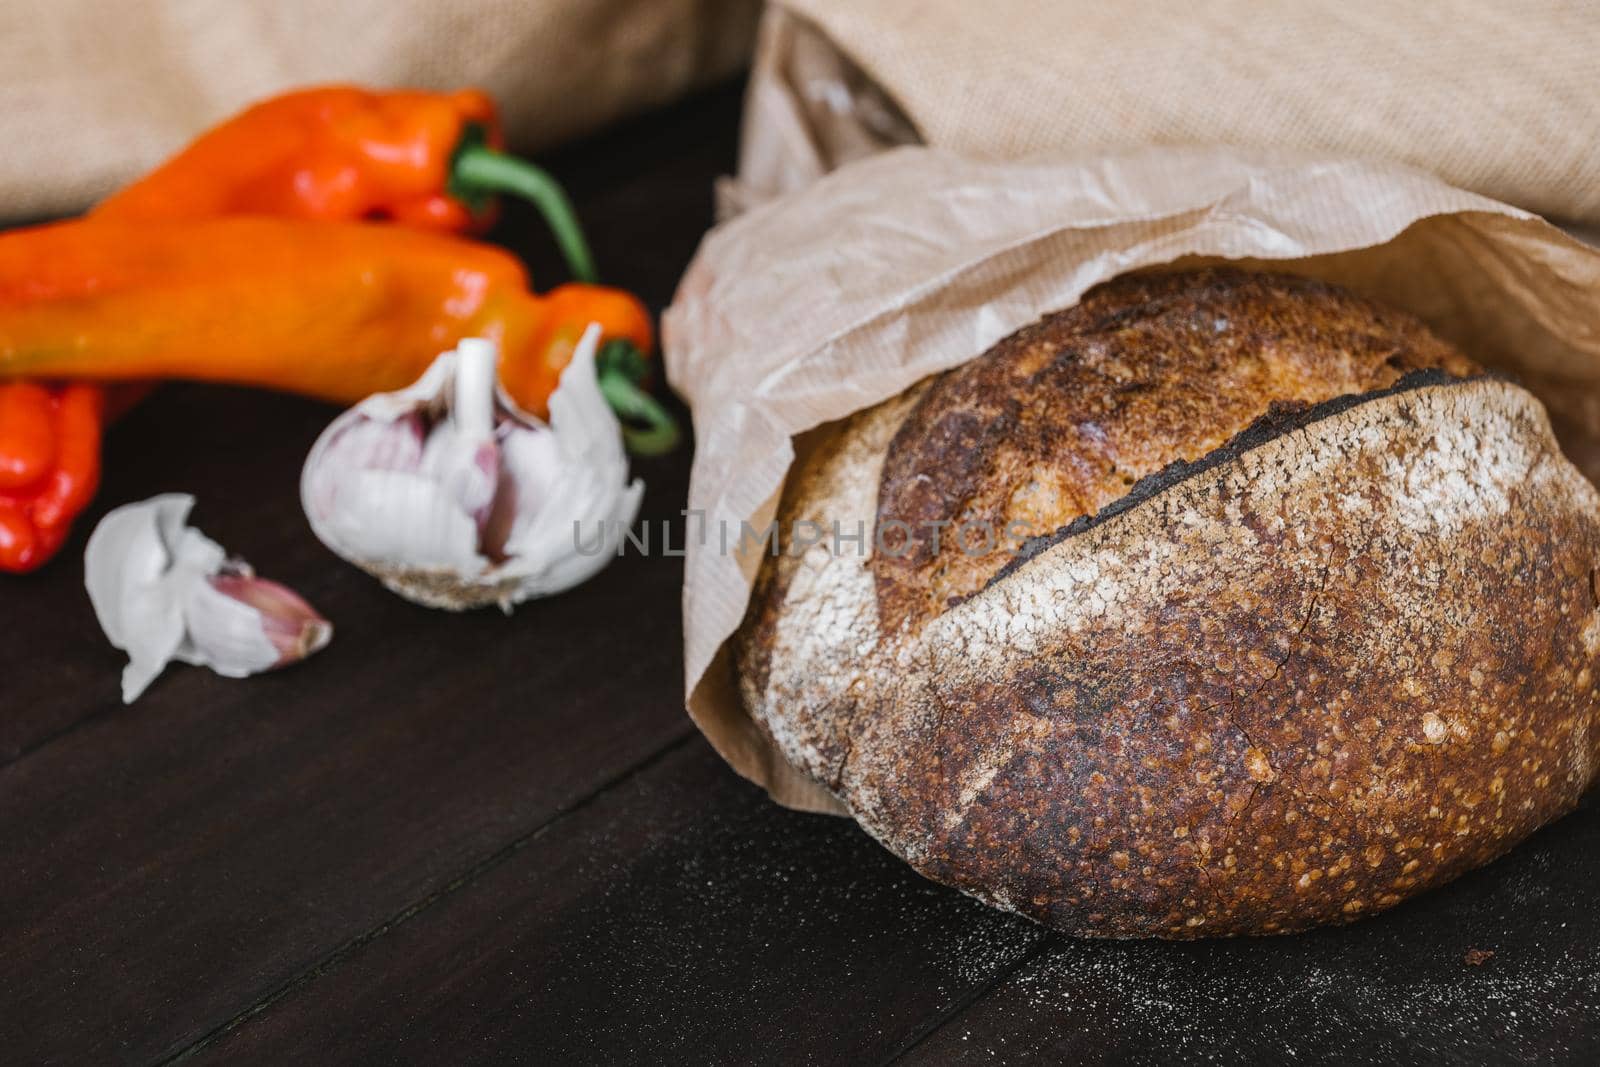 Artisan sourdough bread on wooden table with vegetables. Freshly baked round loaf of sourdough bread by apavlin